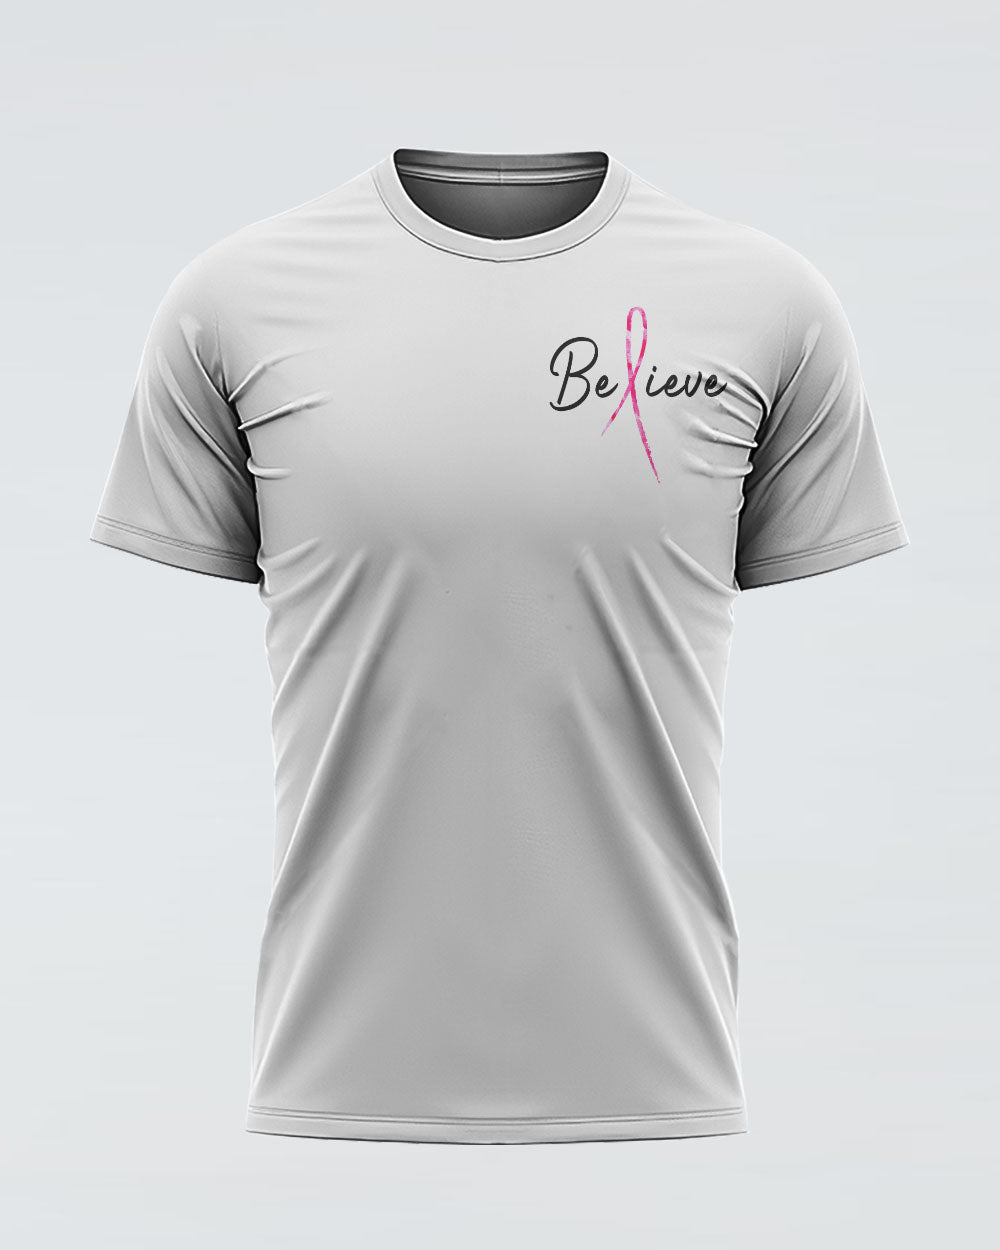 Tyler Lily Ribbon Women's Breast Cancer Awareness Tshirt